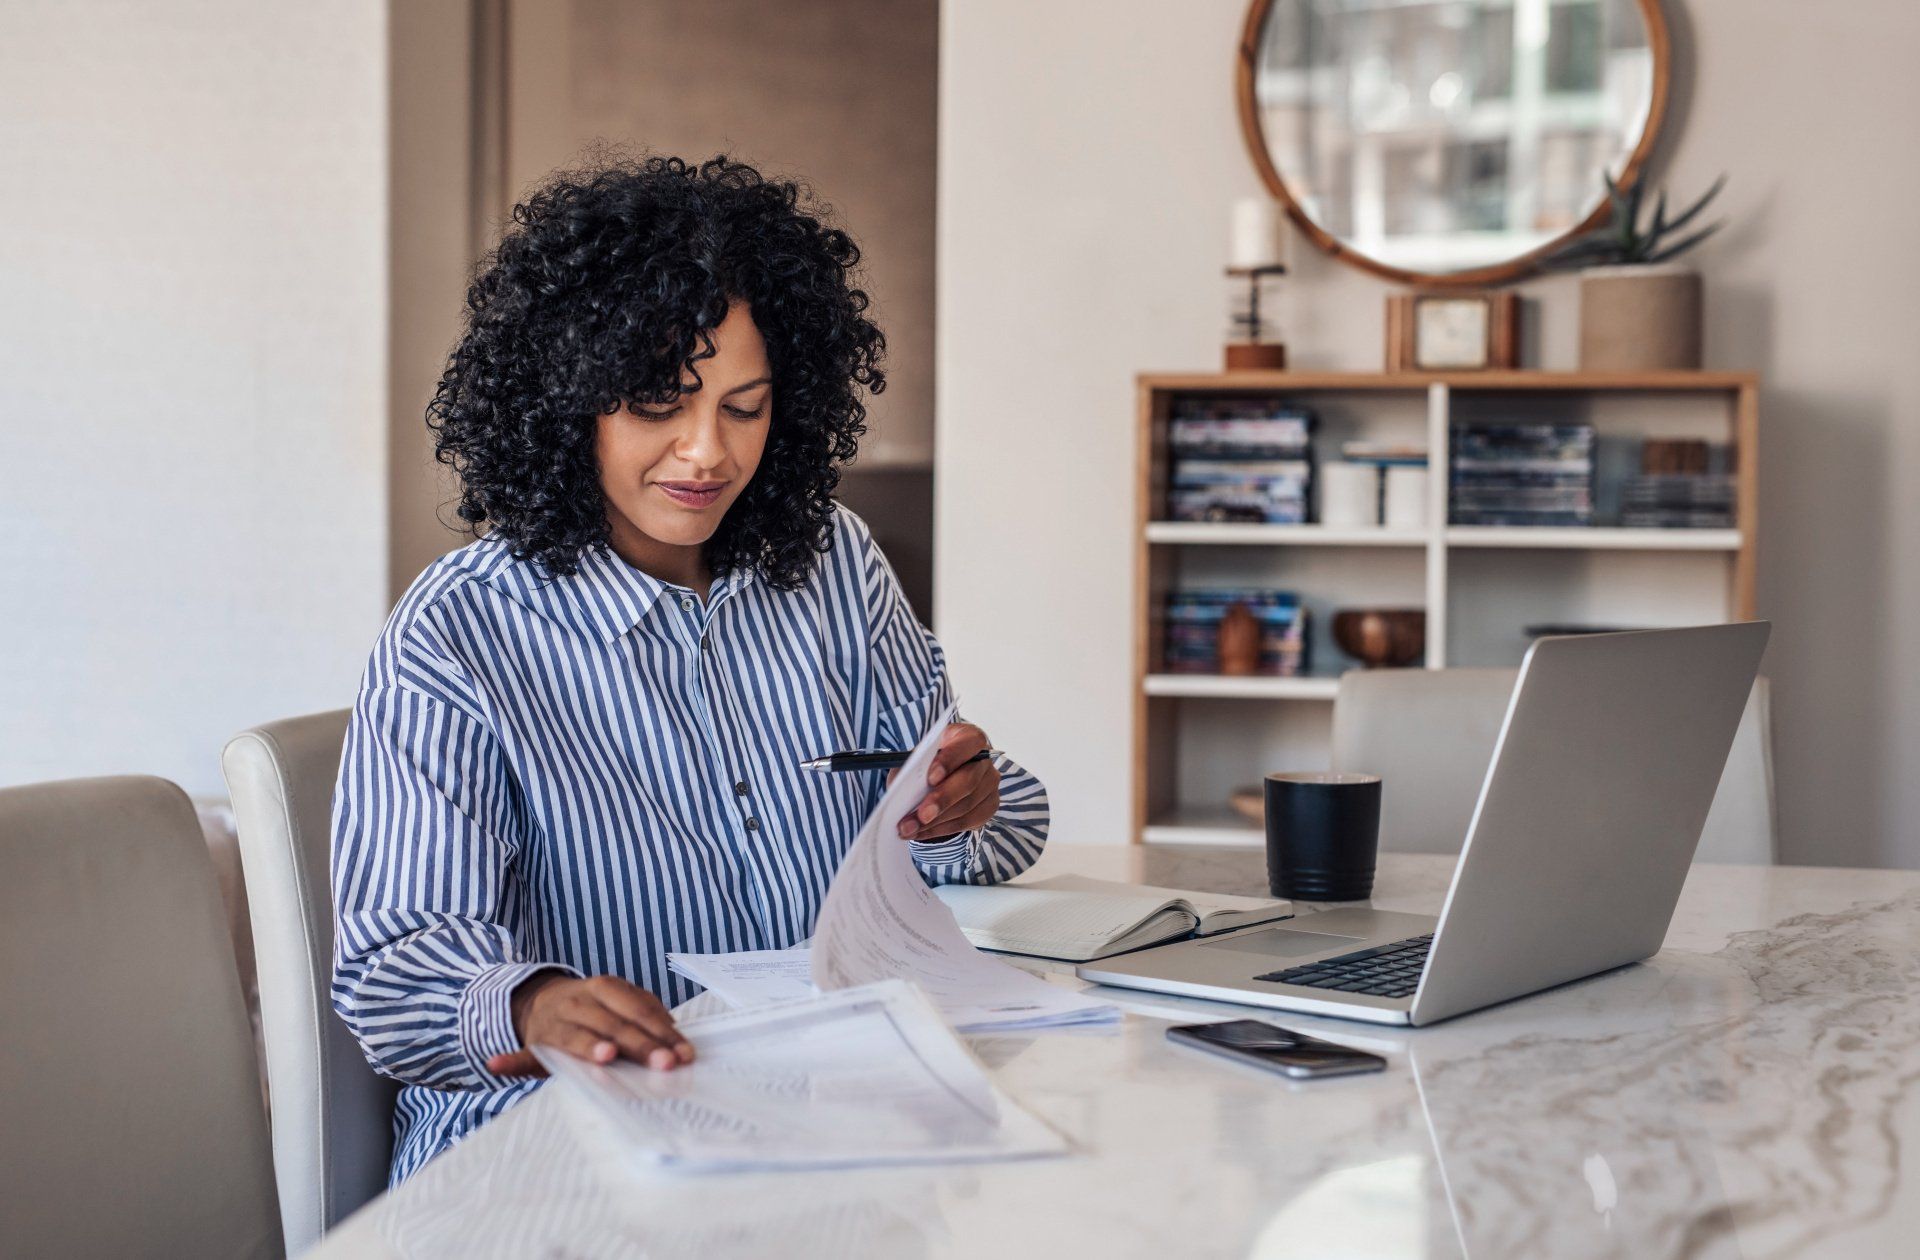 self-employed woman sitting at computer working on tax deductions